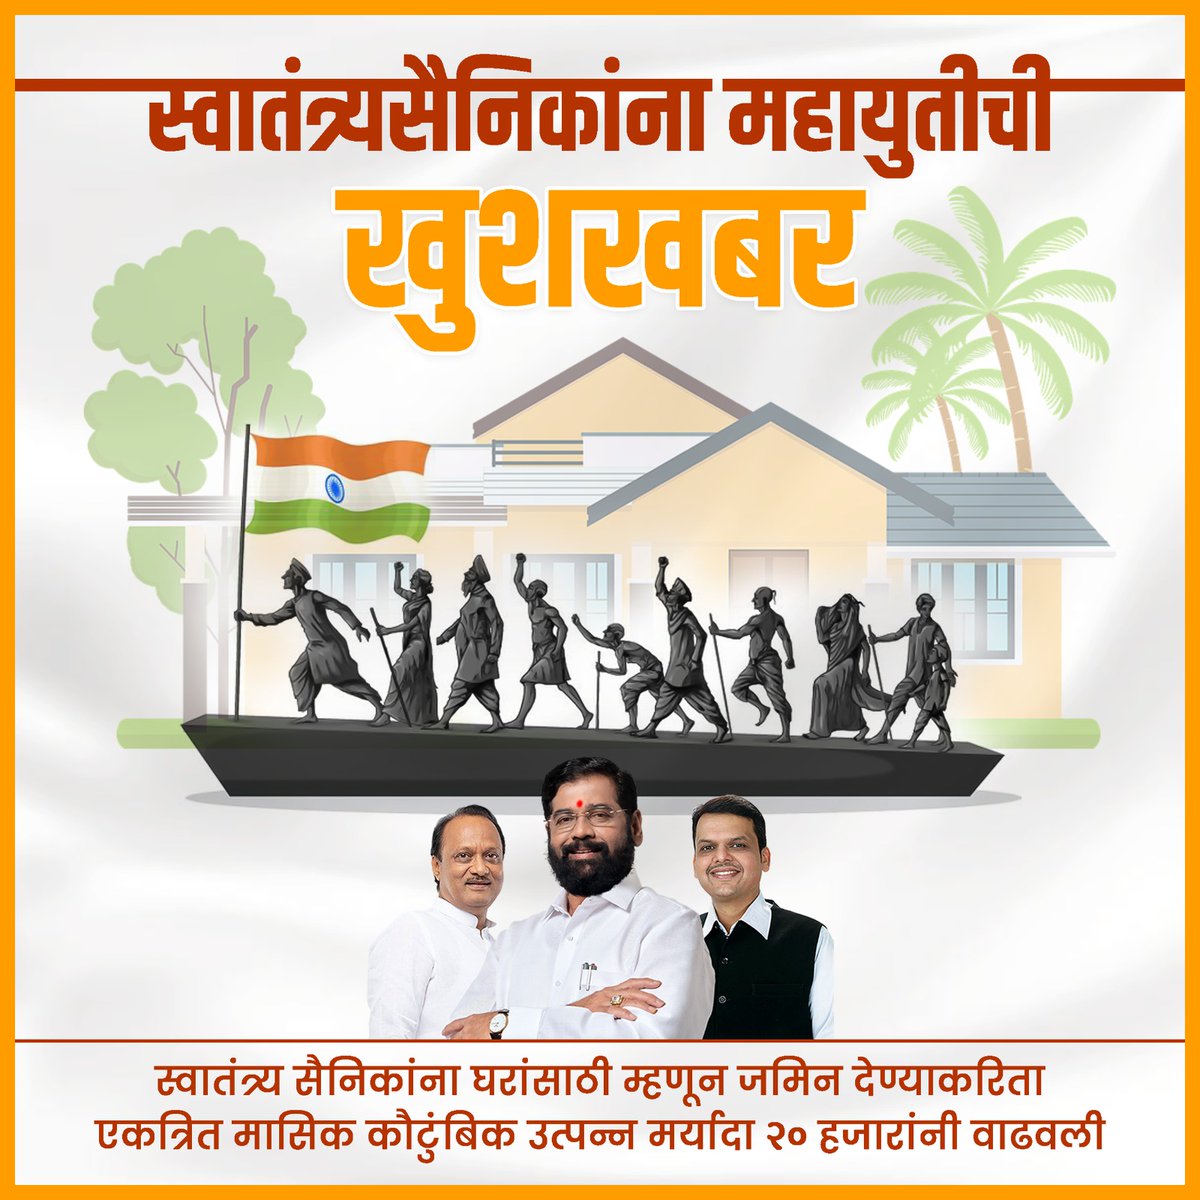 Under the visionary leadership of CM Shinde, the Mahayuti government announces a heartwarming initiative to increase the income limit for land allotment to freedom fighters' houses. This gesture reflects the govt appreciation for their sacrifices & contributions to our nation.